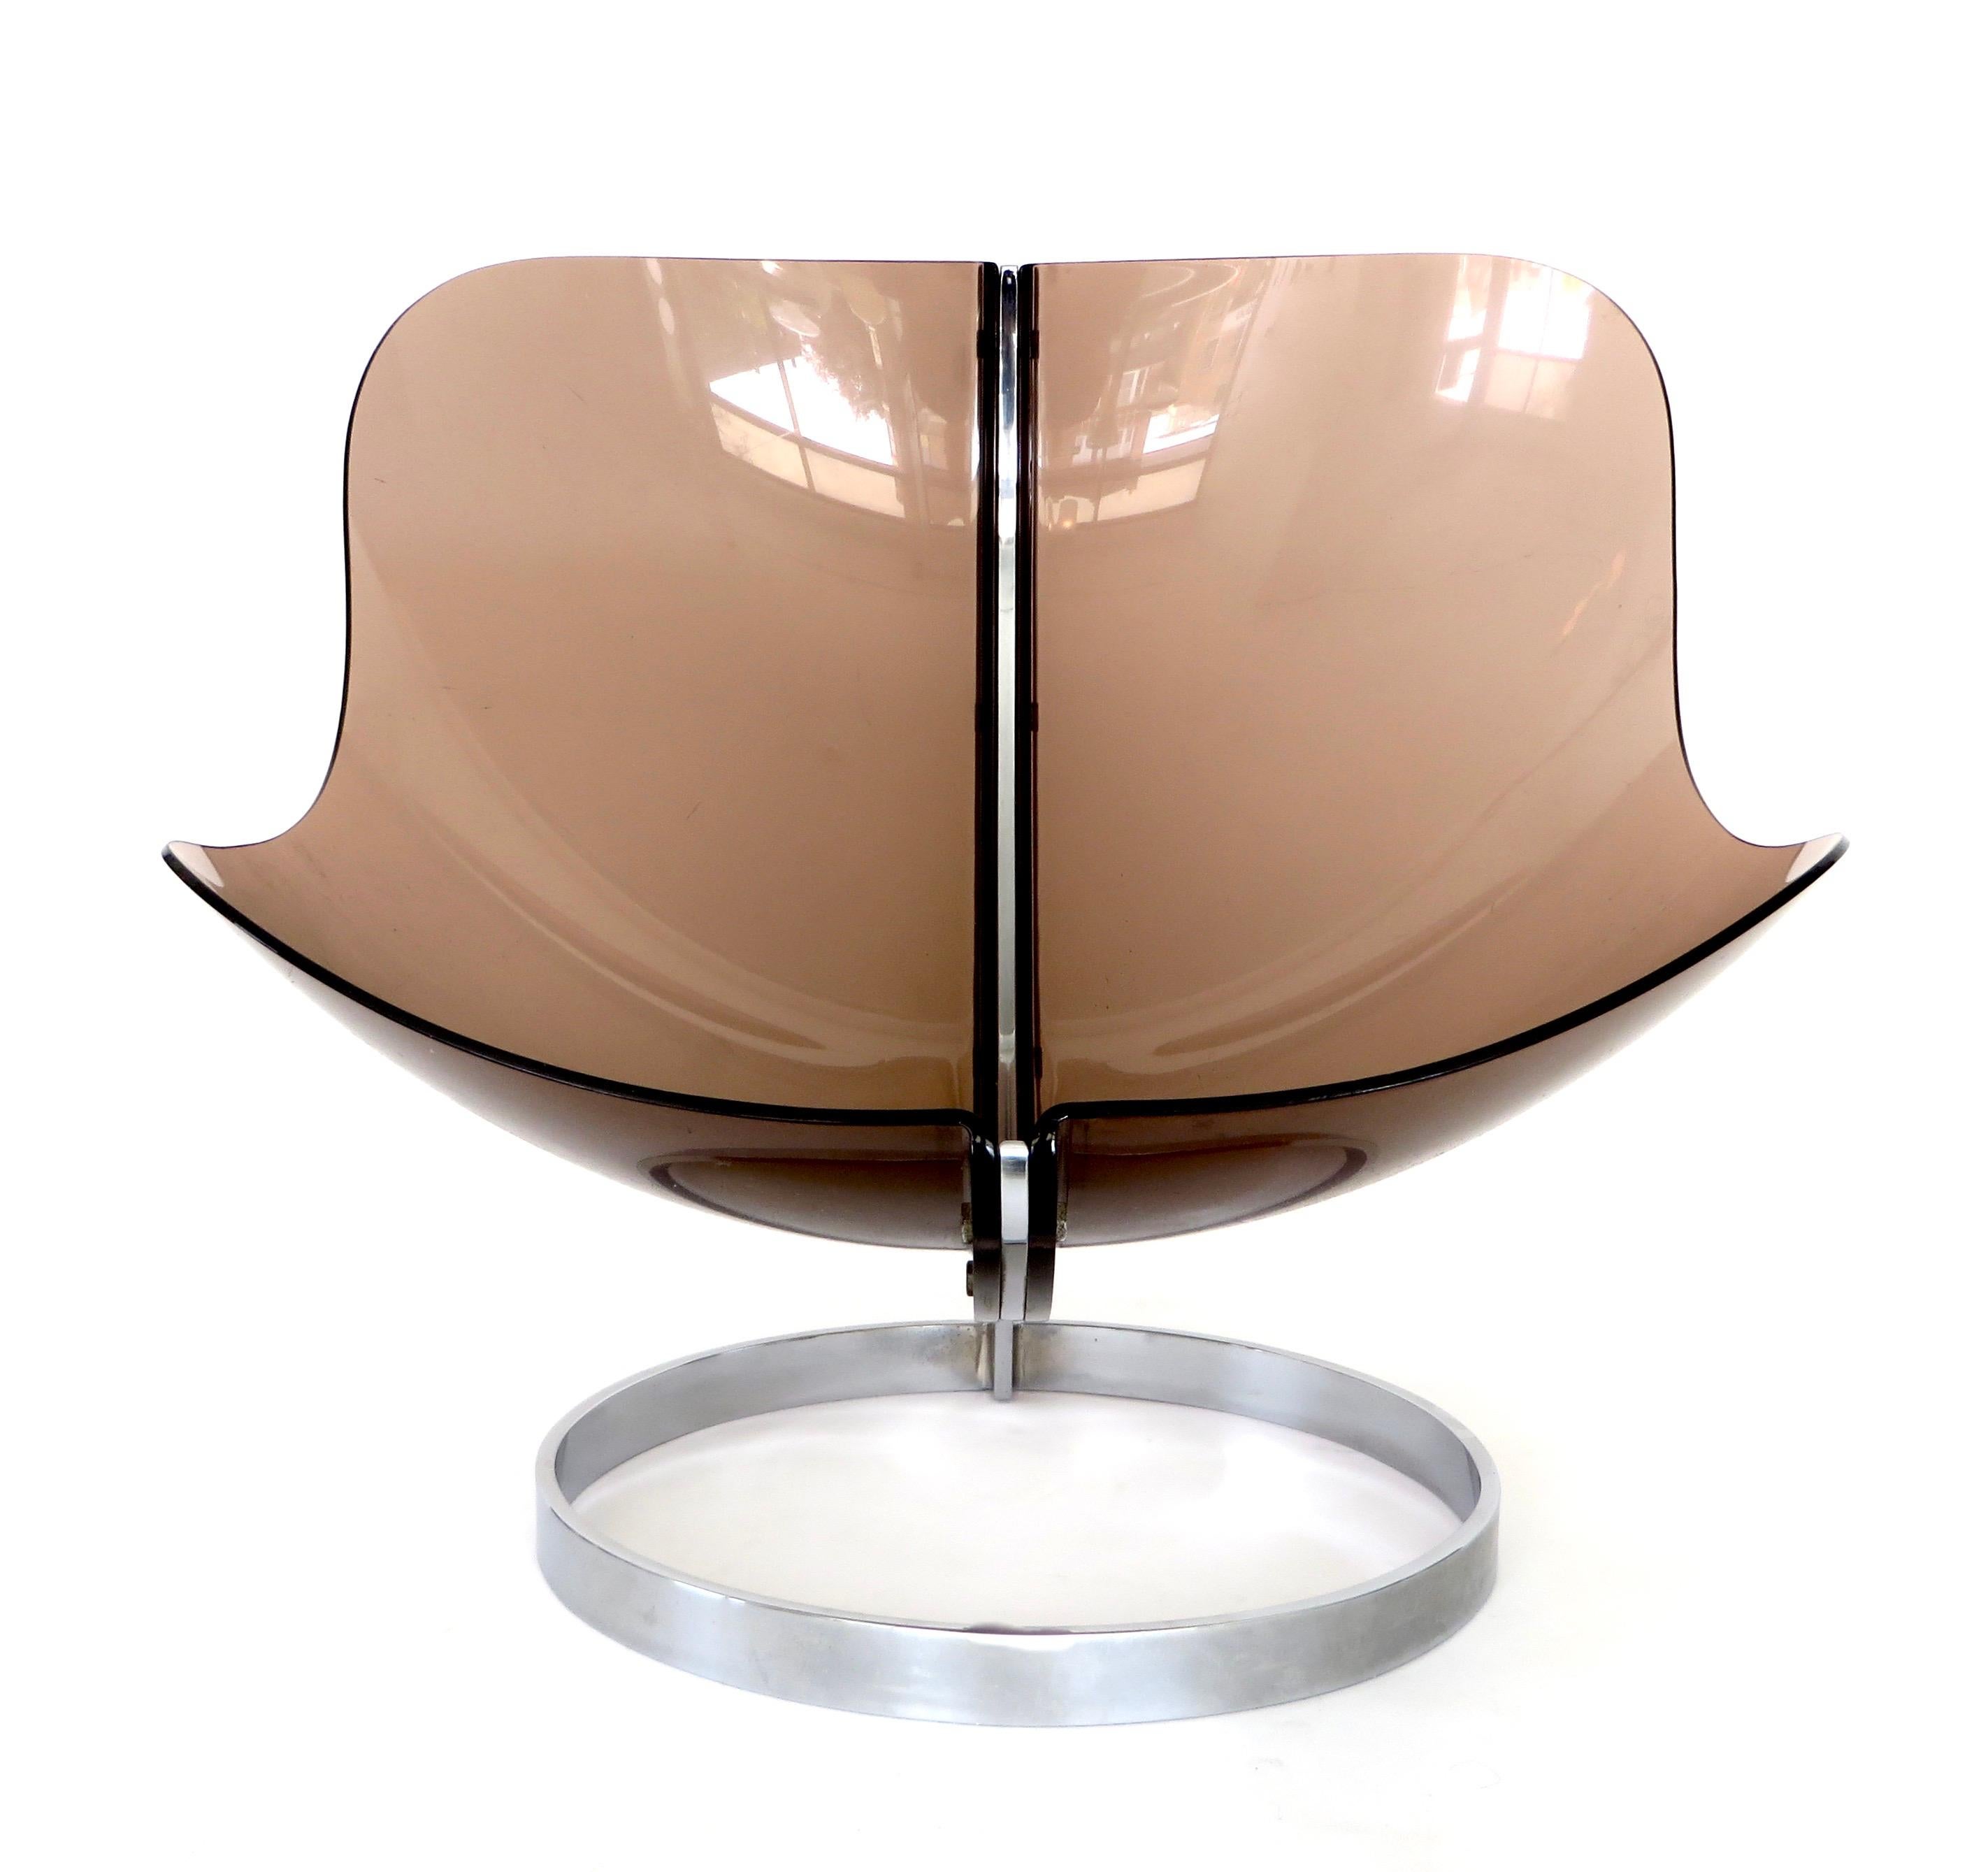 Boris Tabacoff French Sphere Chair Lucite Altuglas and Chrome c1971 For Sale 1